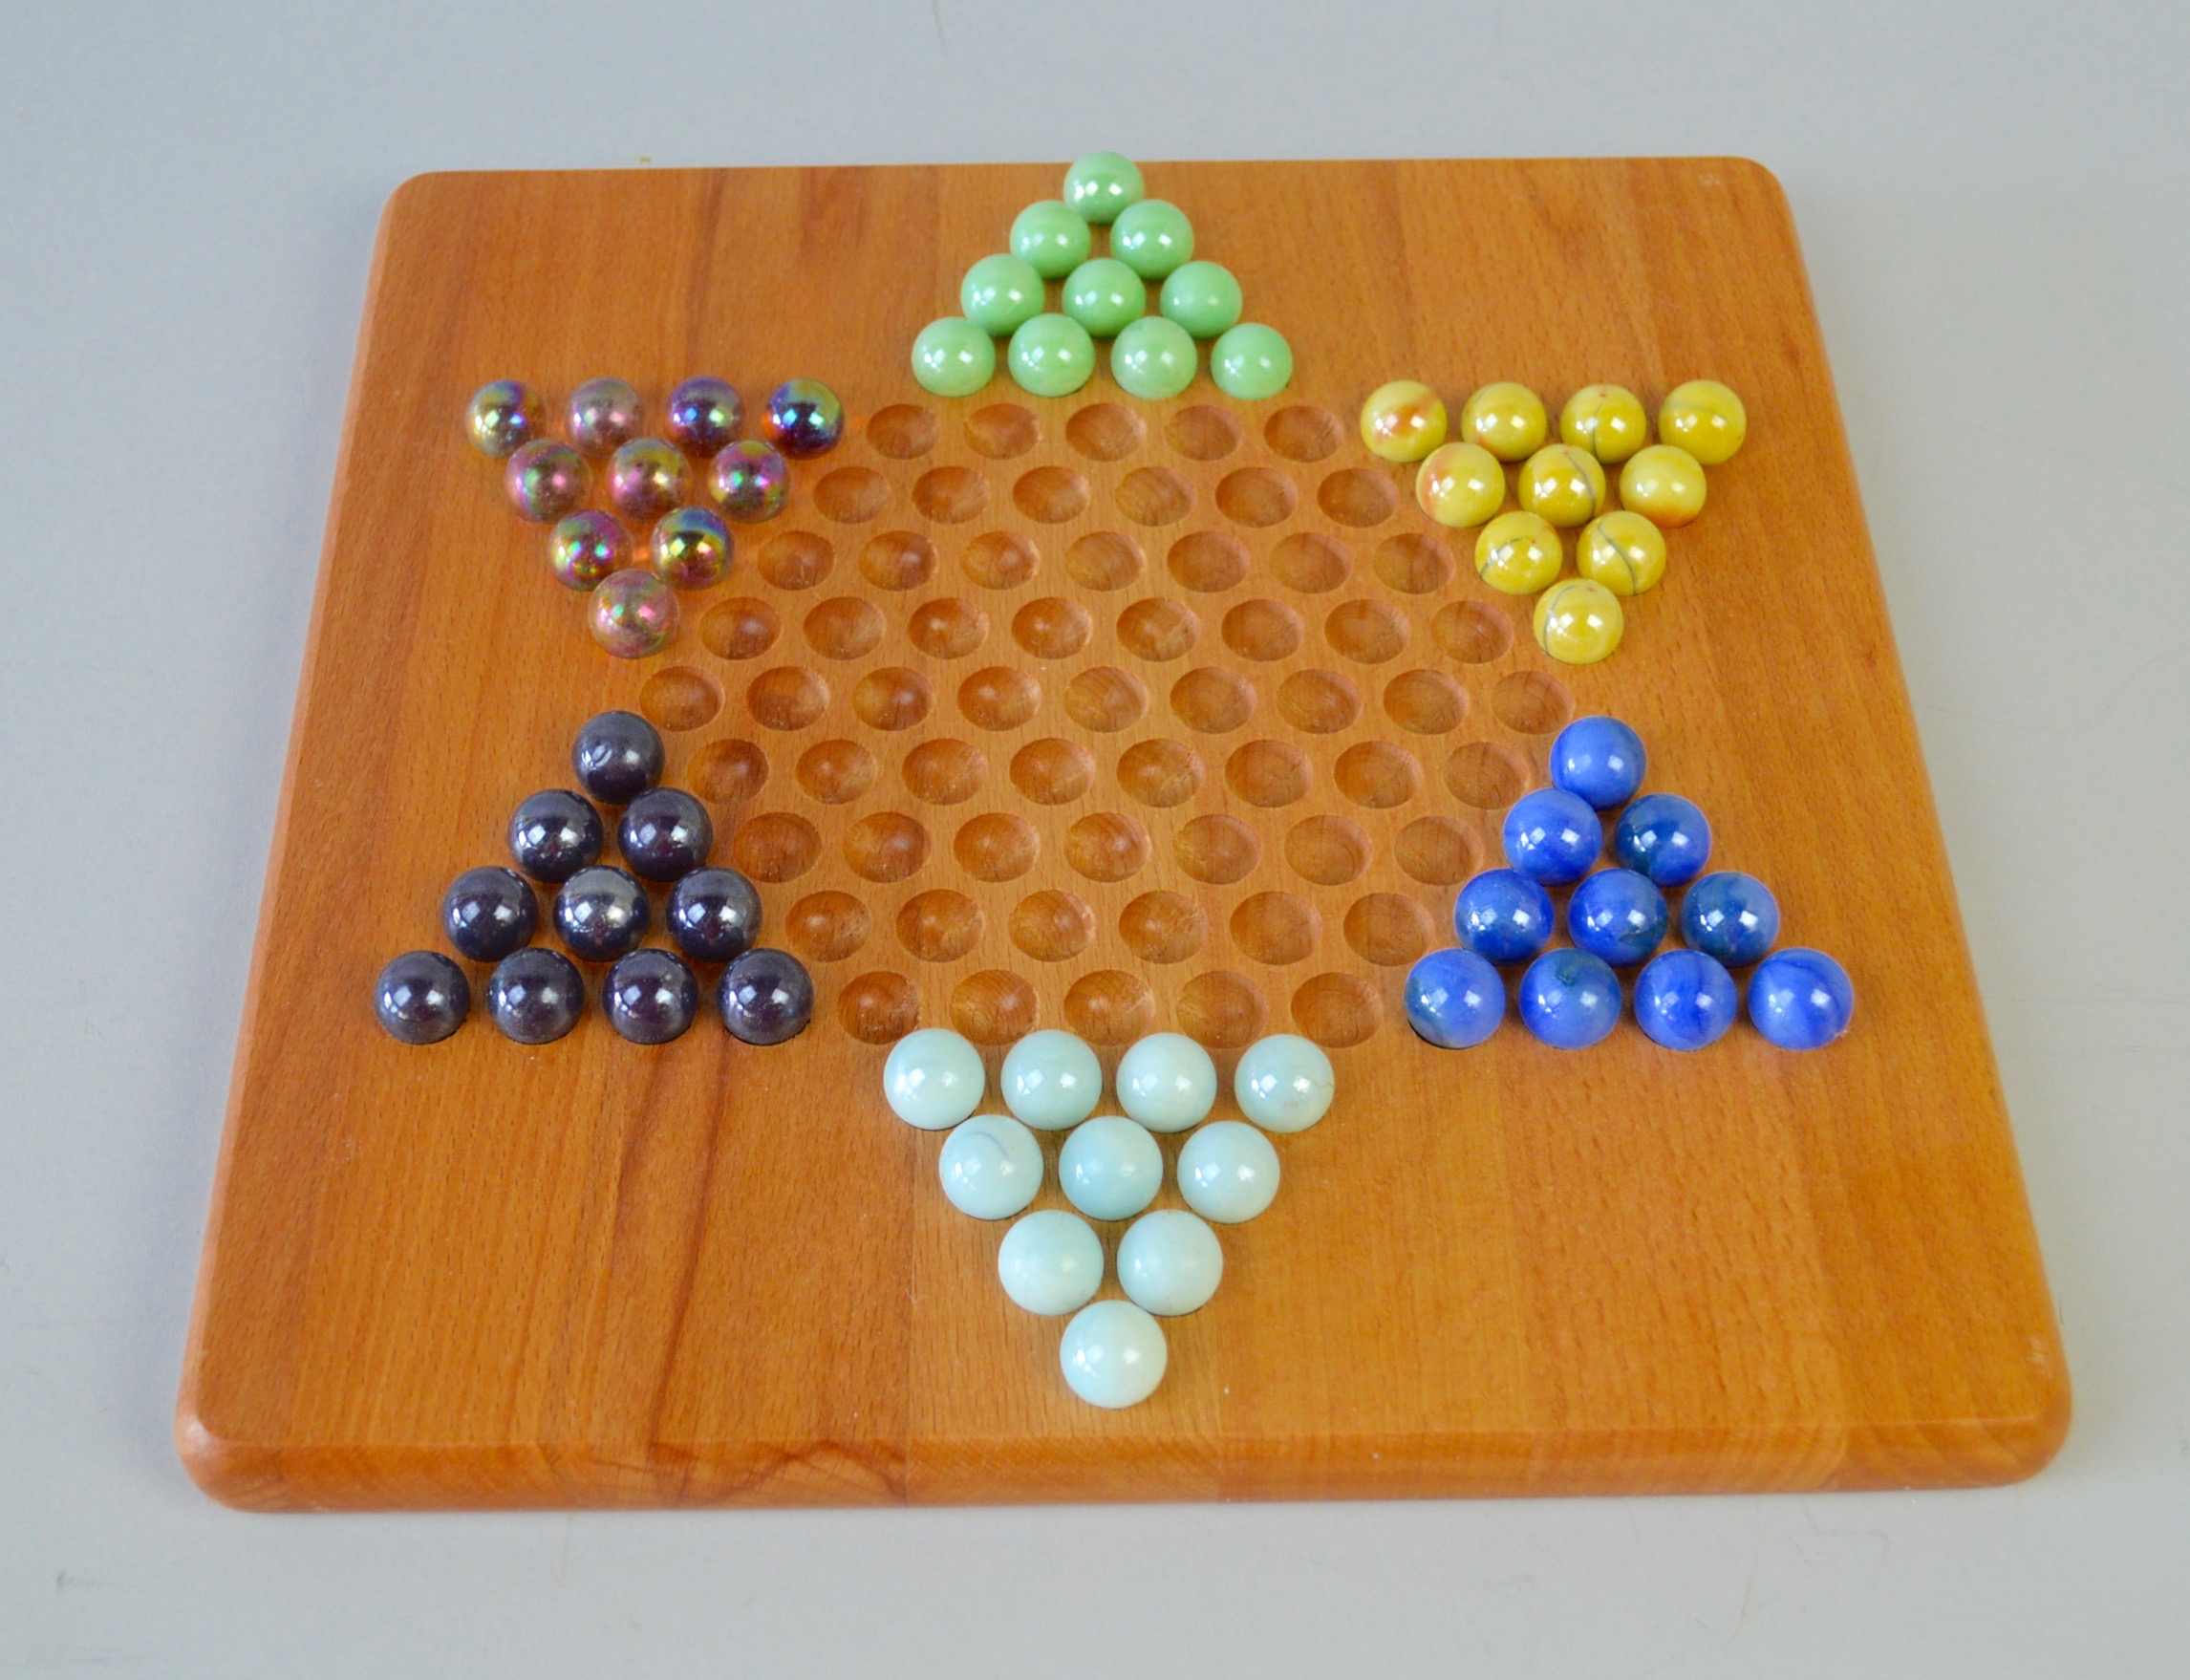 deluxe chinese checkers set